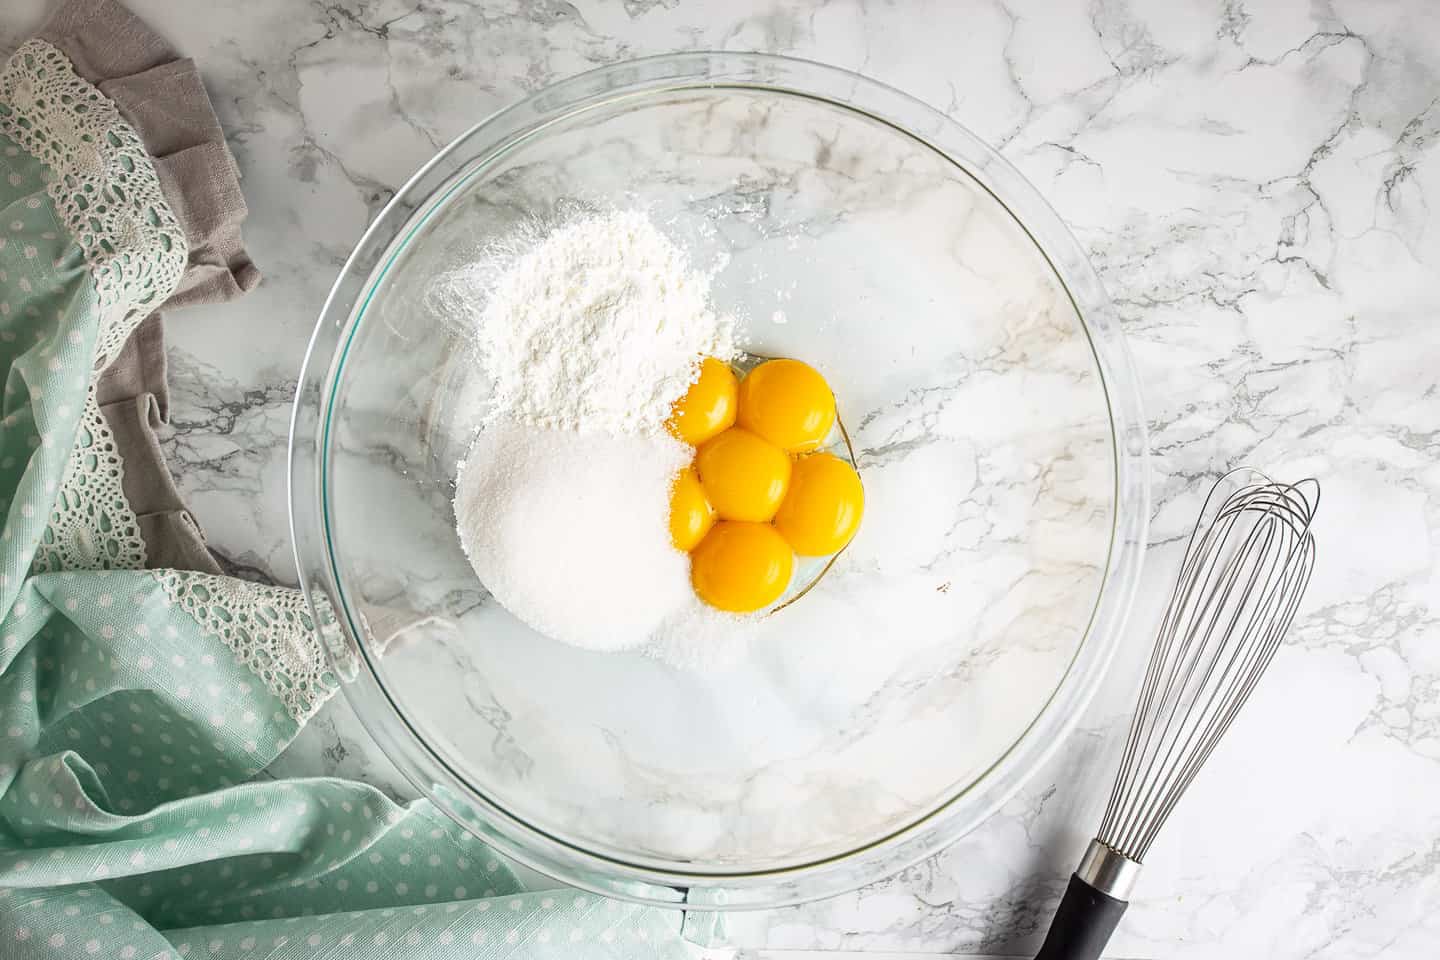 Egg yolks, sugar, cornstarch, and salt in a large glass mixing bowl.